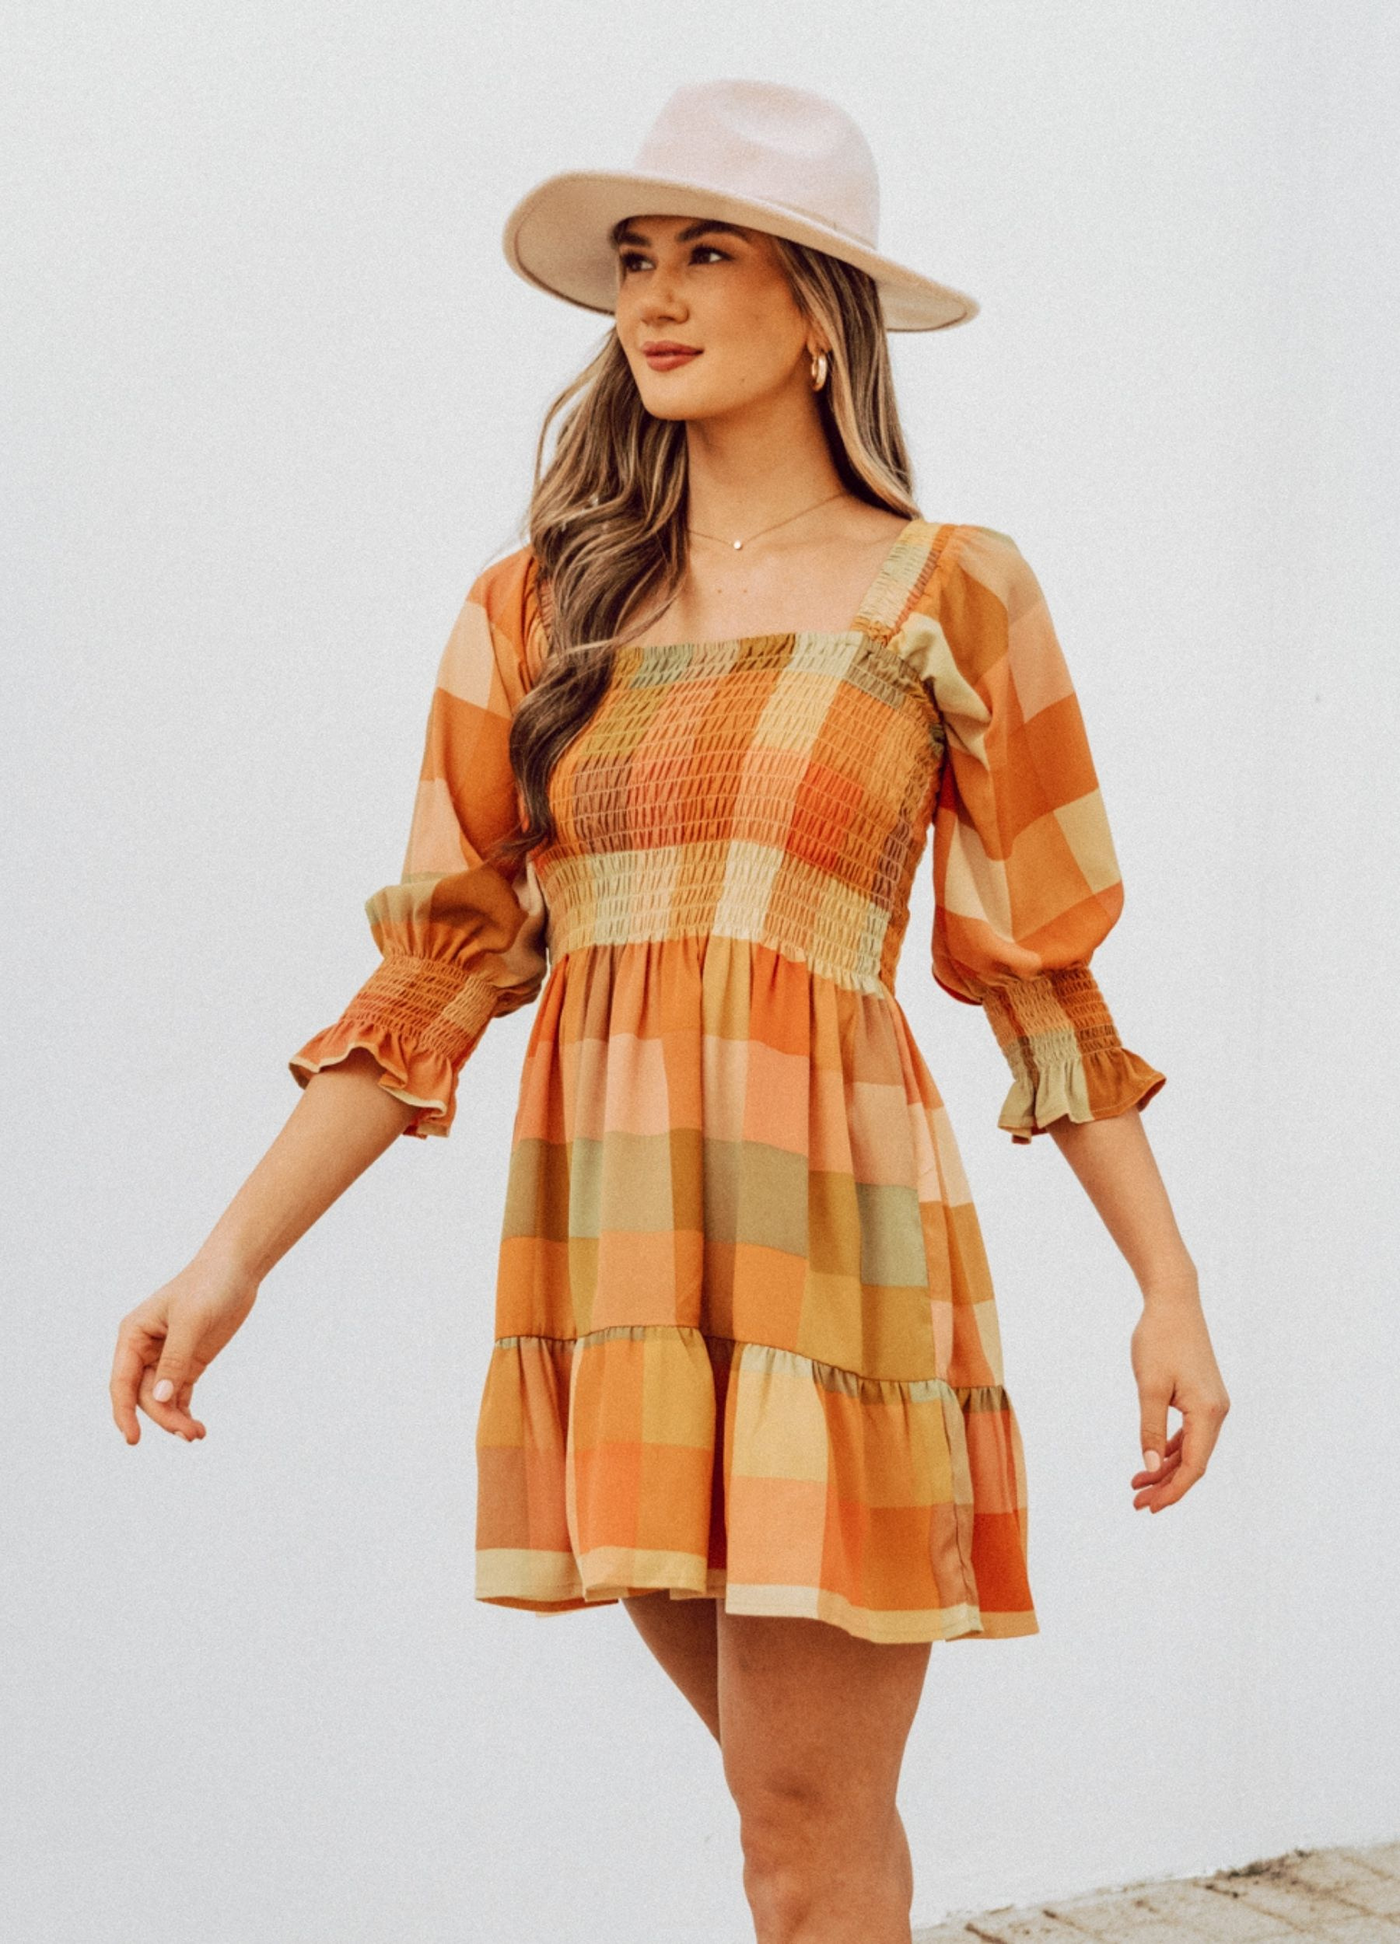 Woman wearing check mini dress in orange and khaki colourway with hat